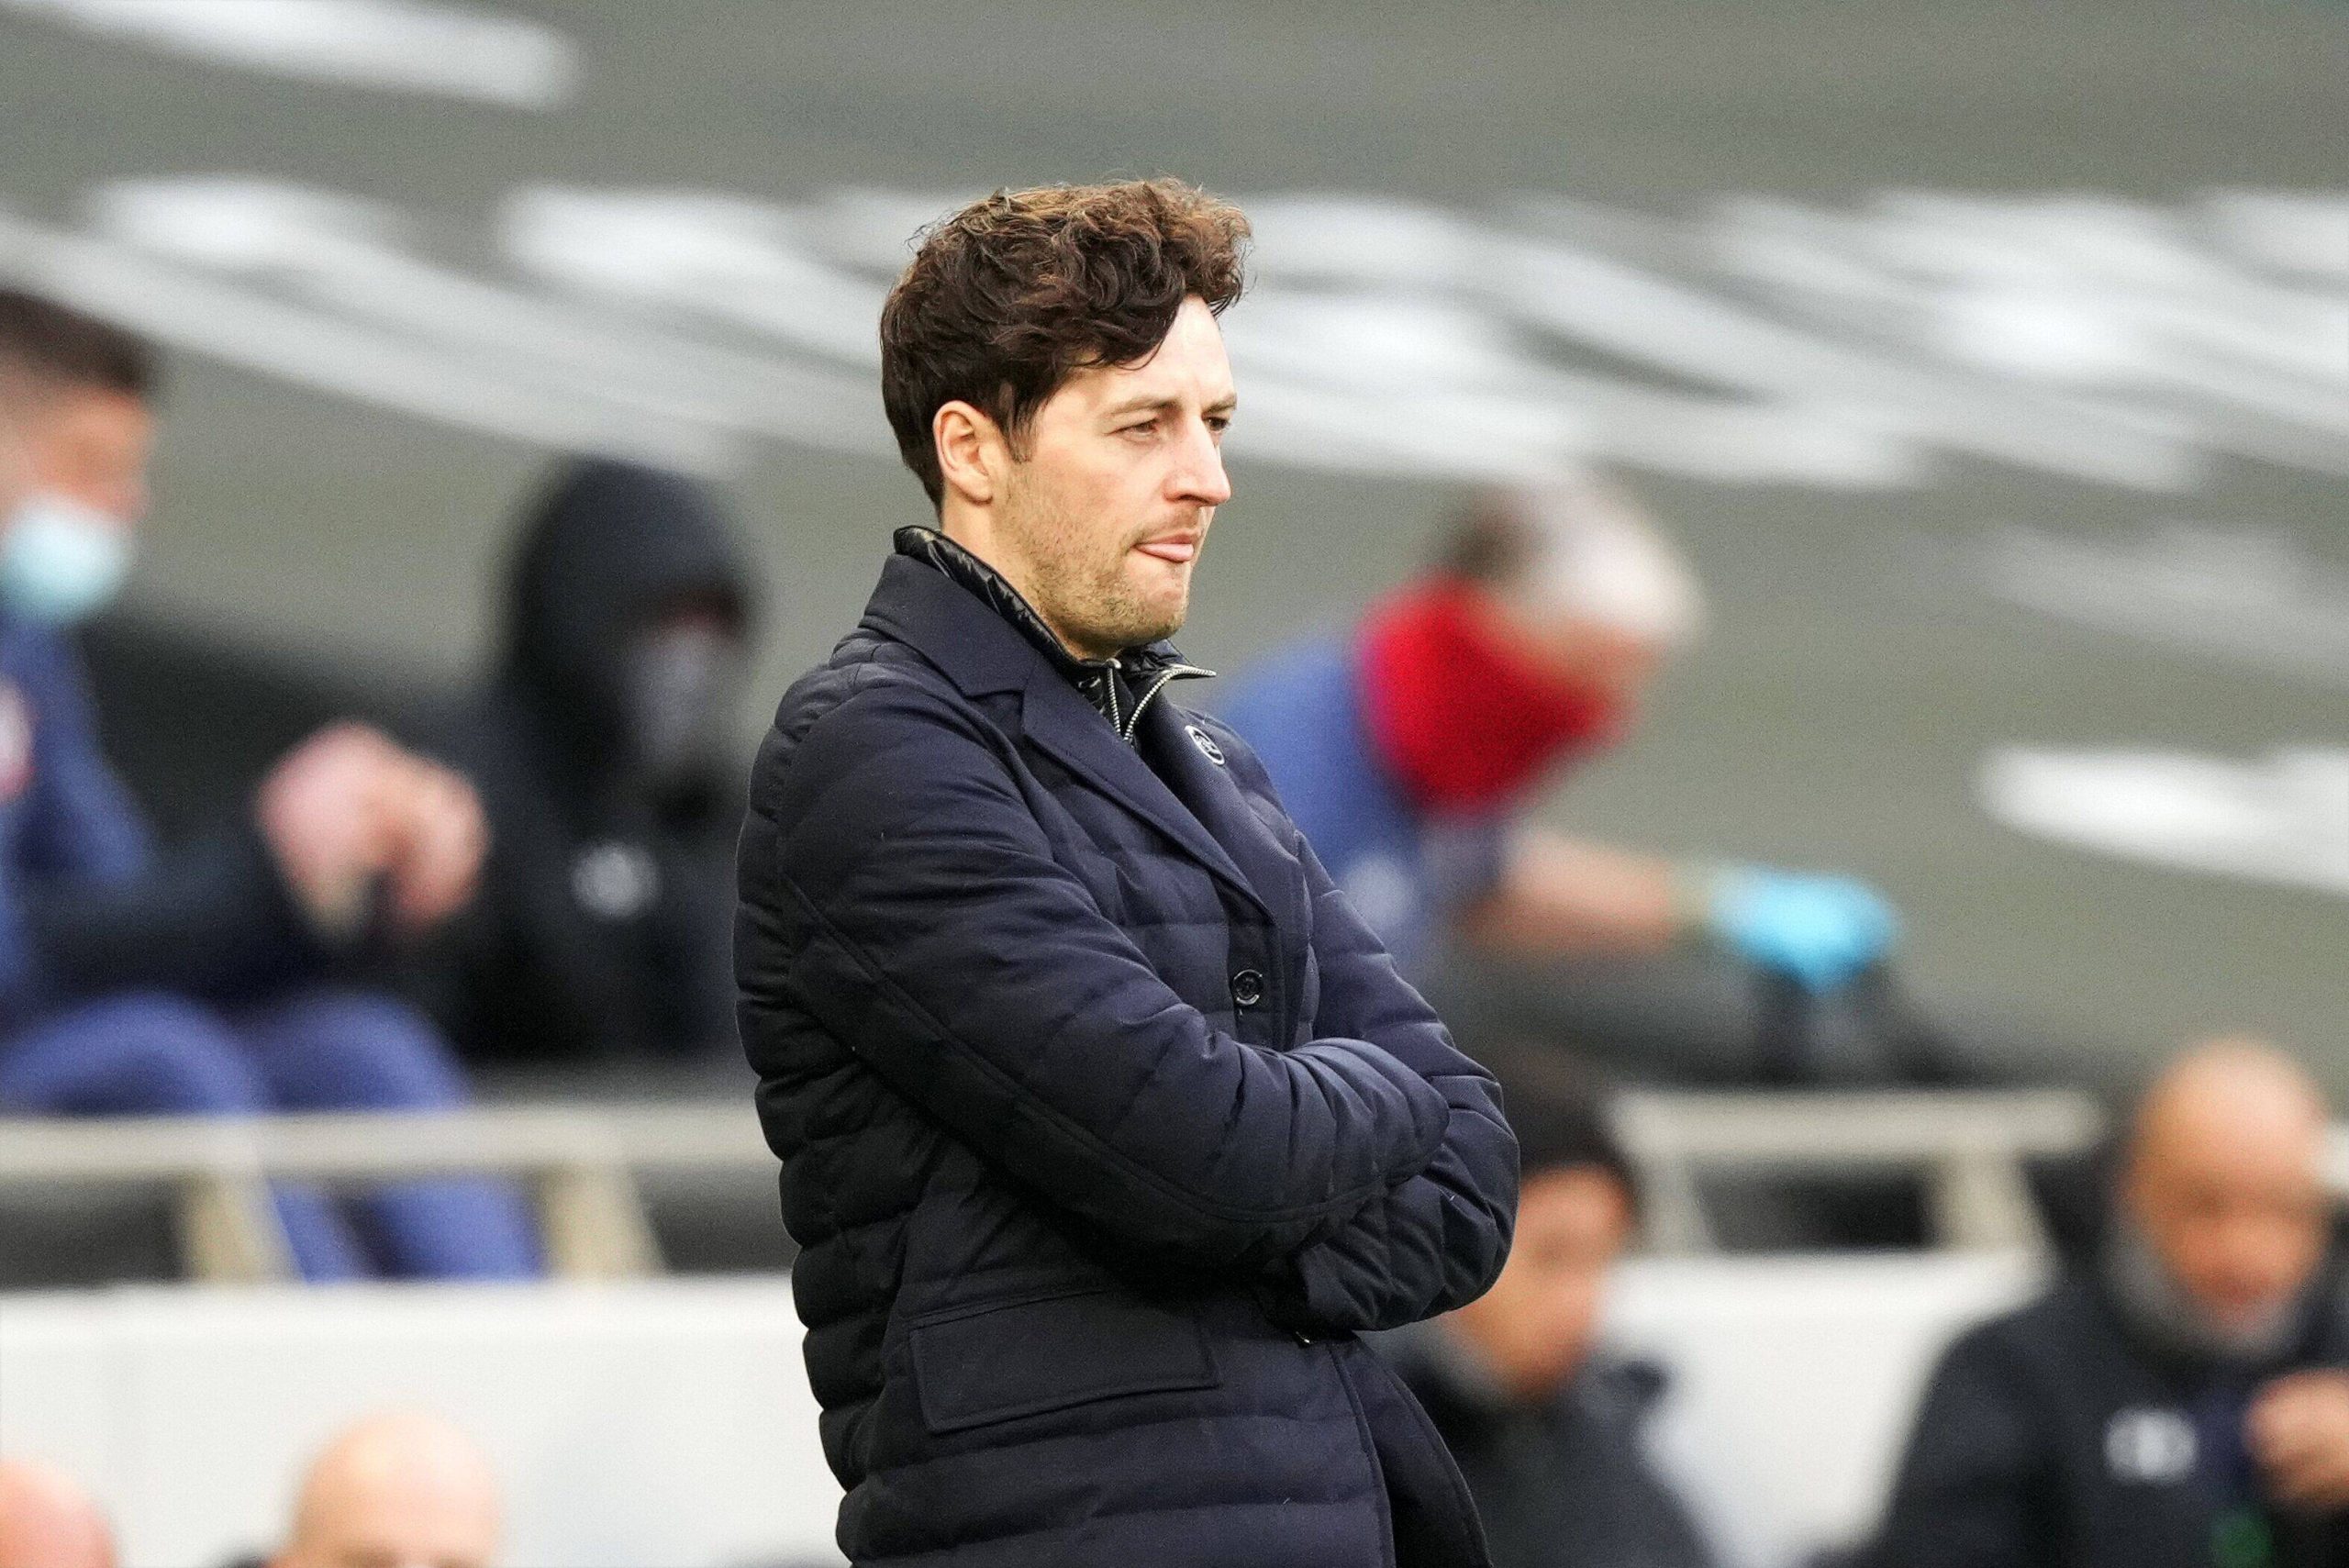 Charlie Eccleshare has revealed that Ryan Mason is excited about managing Tottenham.